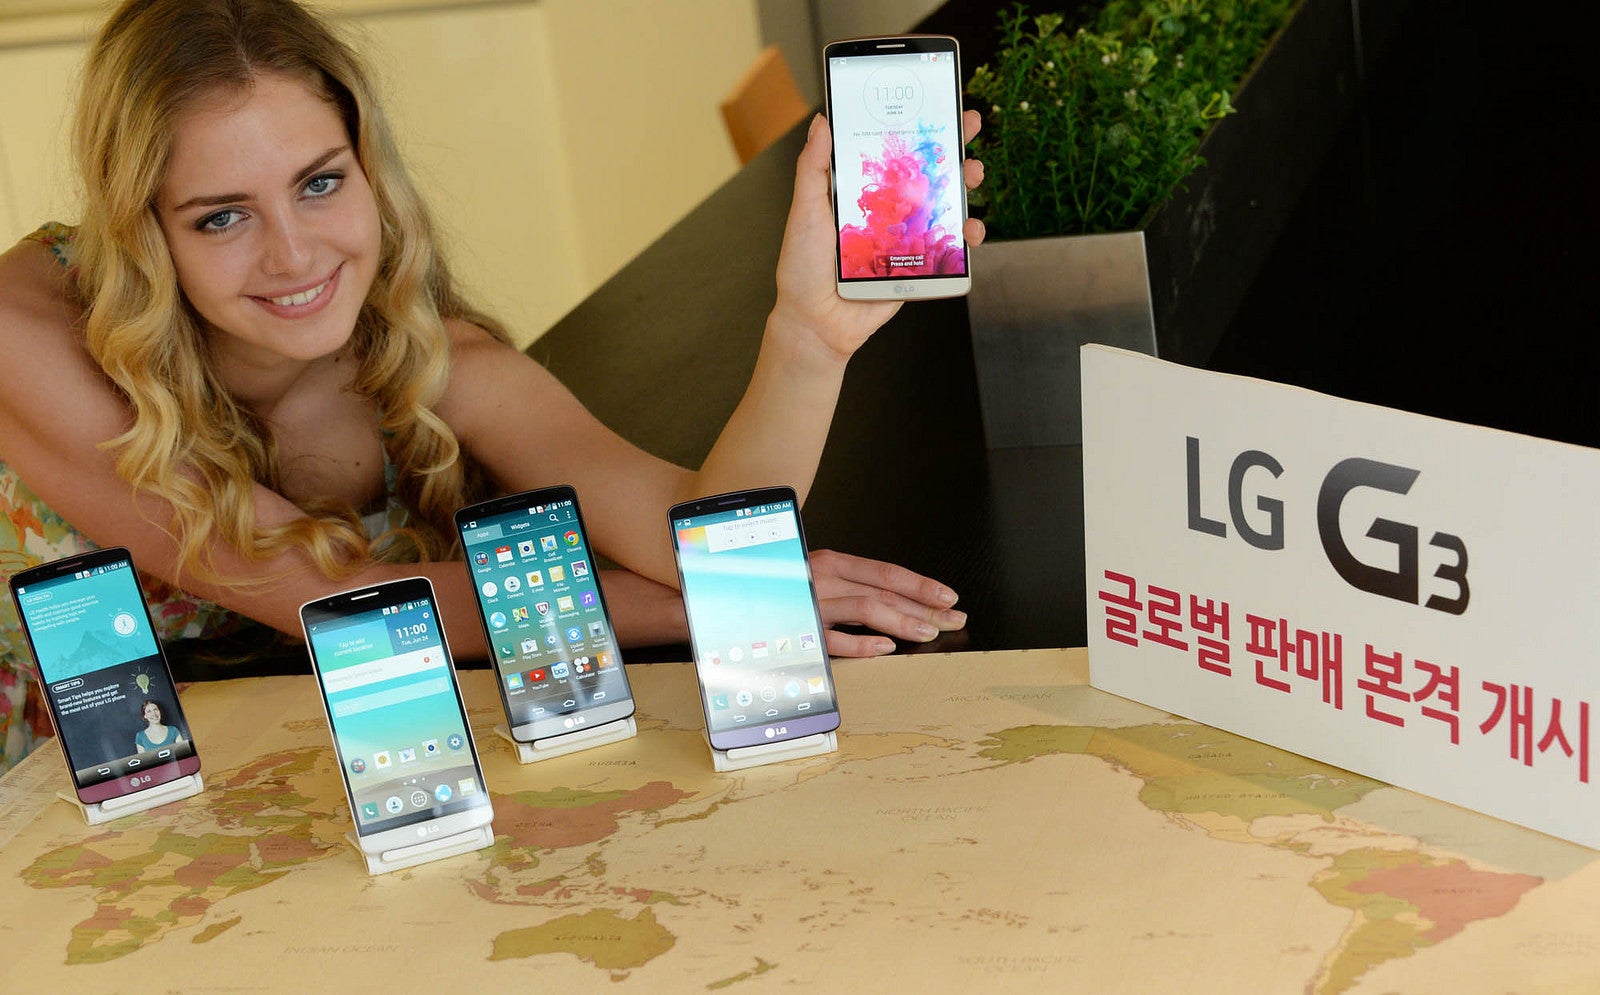 LG G3 will be launched around the world starting June 27